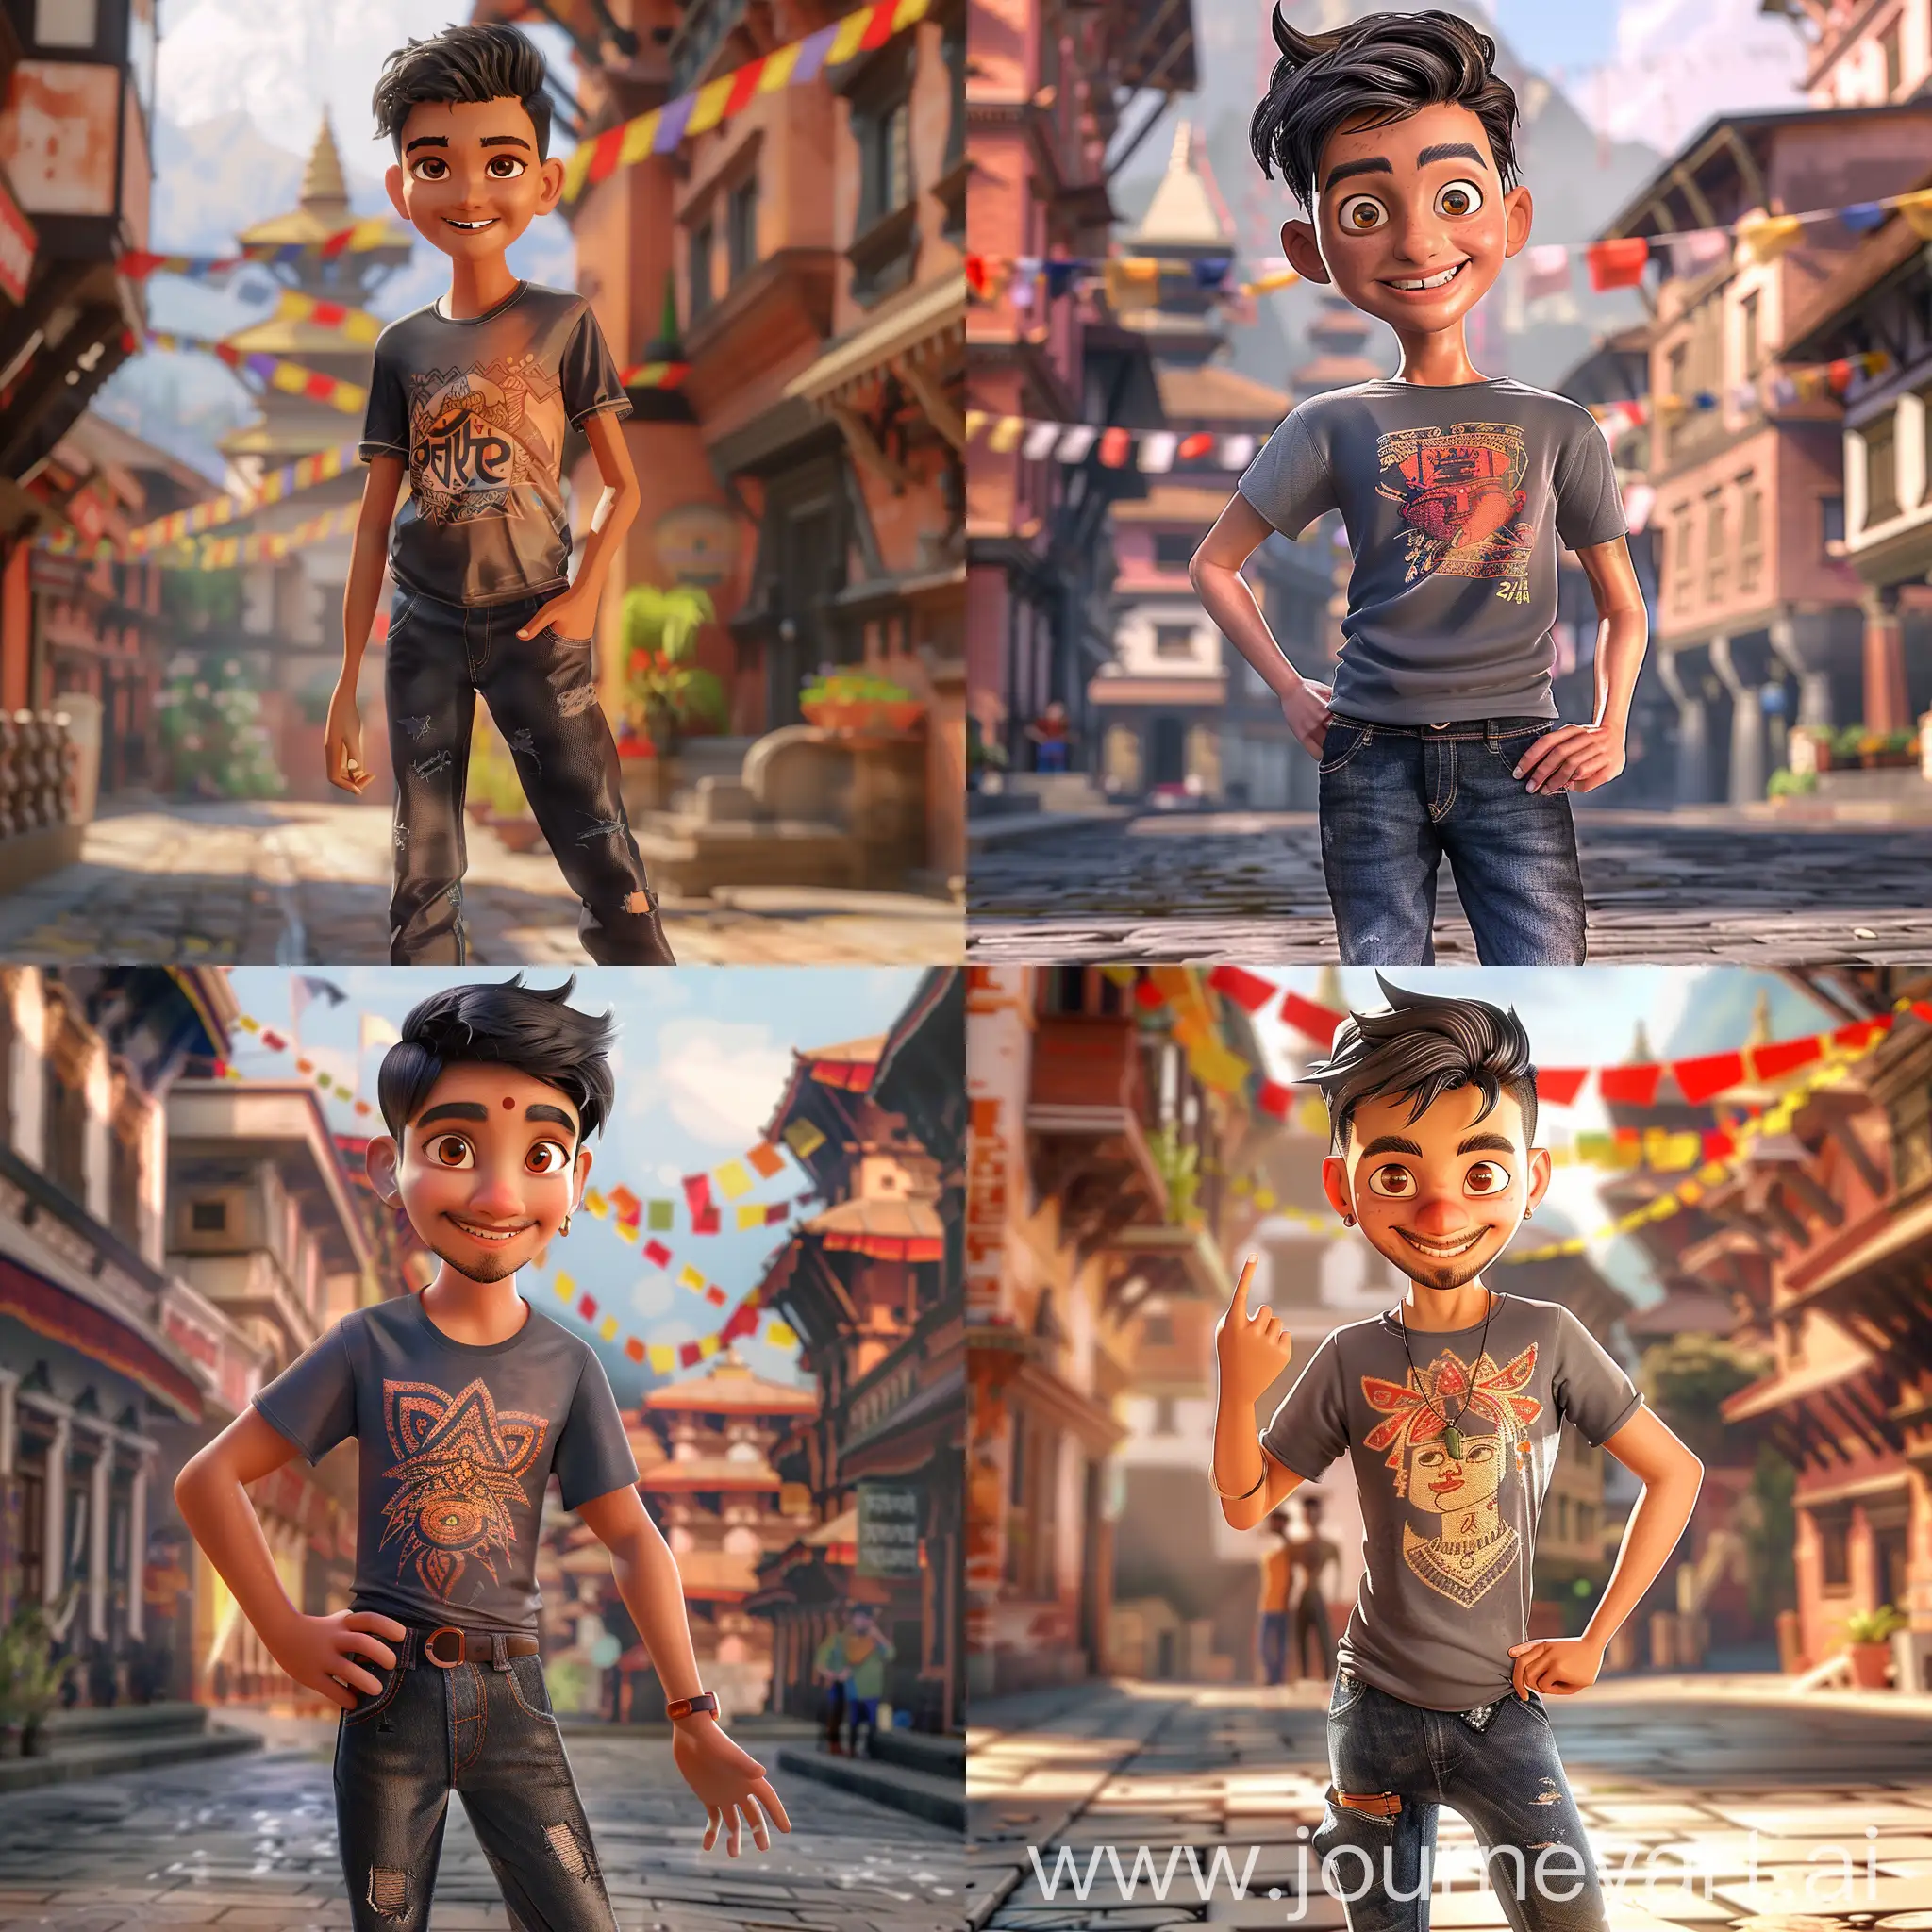 A highly-detailed, realistic image of a Nepali Gorkhali boy, aged 24, with a height of 5 feet 10 inches. The boy is an influencer promoting T-shirts and pants. He has short black hair, a well-groomed beard, and captivating brown eyes. The boy is standing confidently on a picturesque street in Kathmandu, with traditional Nepali architecture and vibrant prayer flags visible in the background. He's wearing a stylish, fitted T-shirt featuring a unique Nepali-inspired design and comfortable, dark-washed denim pants that highlight his tall and slender physique. His smile is genuine and inviting as he strikes a casual yet fashionable pose, with one hand in his pocket and the other gesturing towards his outfit. The lighting is warm and natural, casting soft shadows and accentuating the boy's features and clothing details. The overall image has a modern and trendy aesthetic with a touch of Nepali charm.